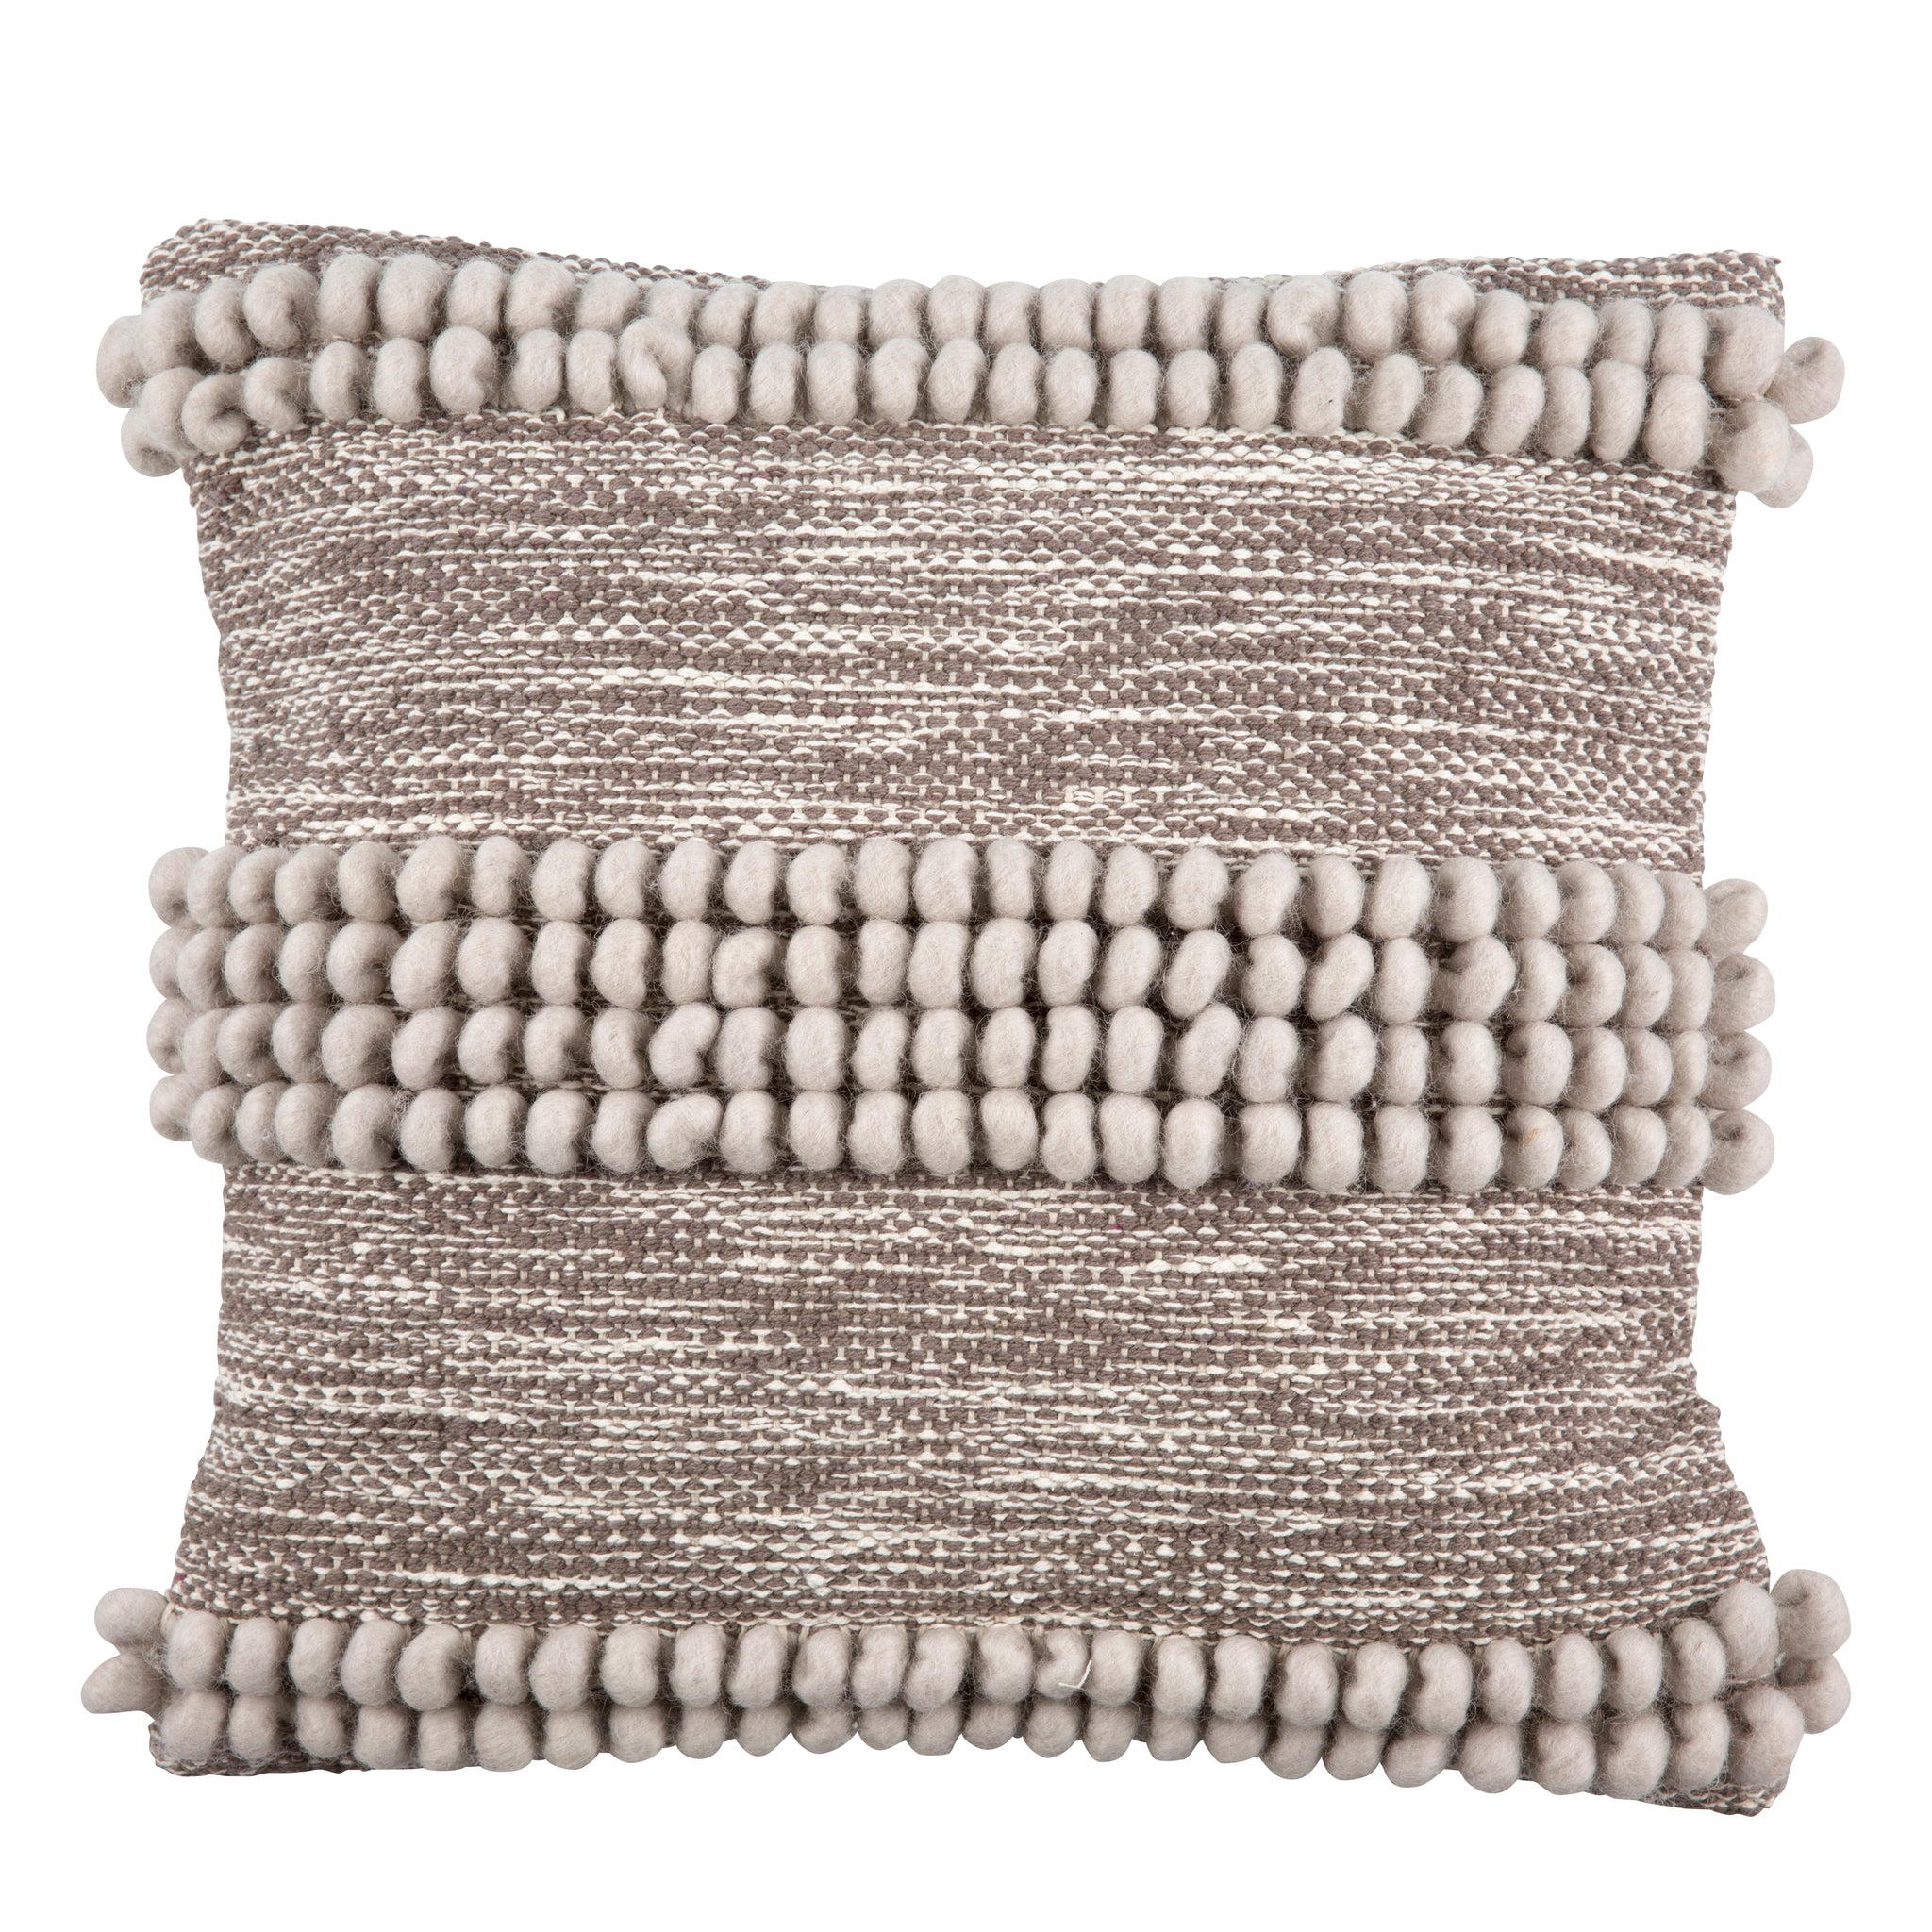 Lene Bjerre Tamia Cushion filled with Duck feathers - 45x45cm